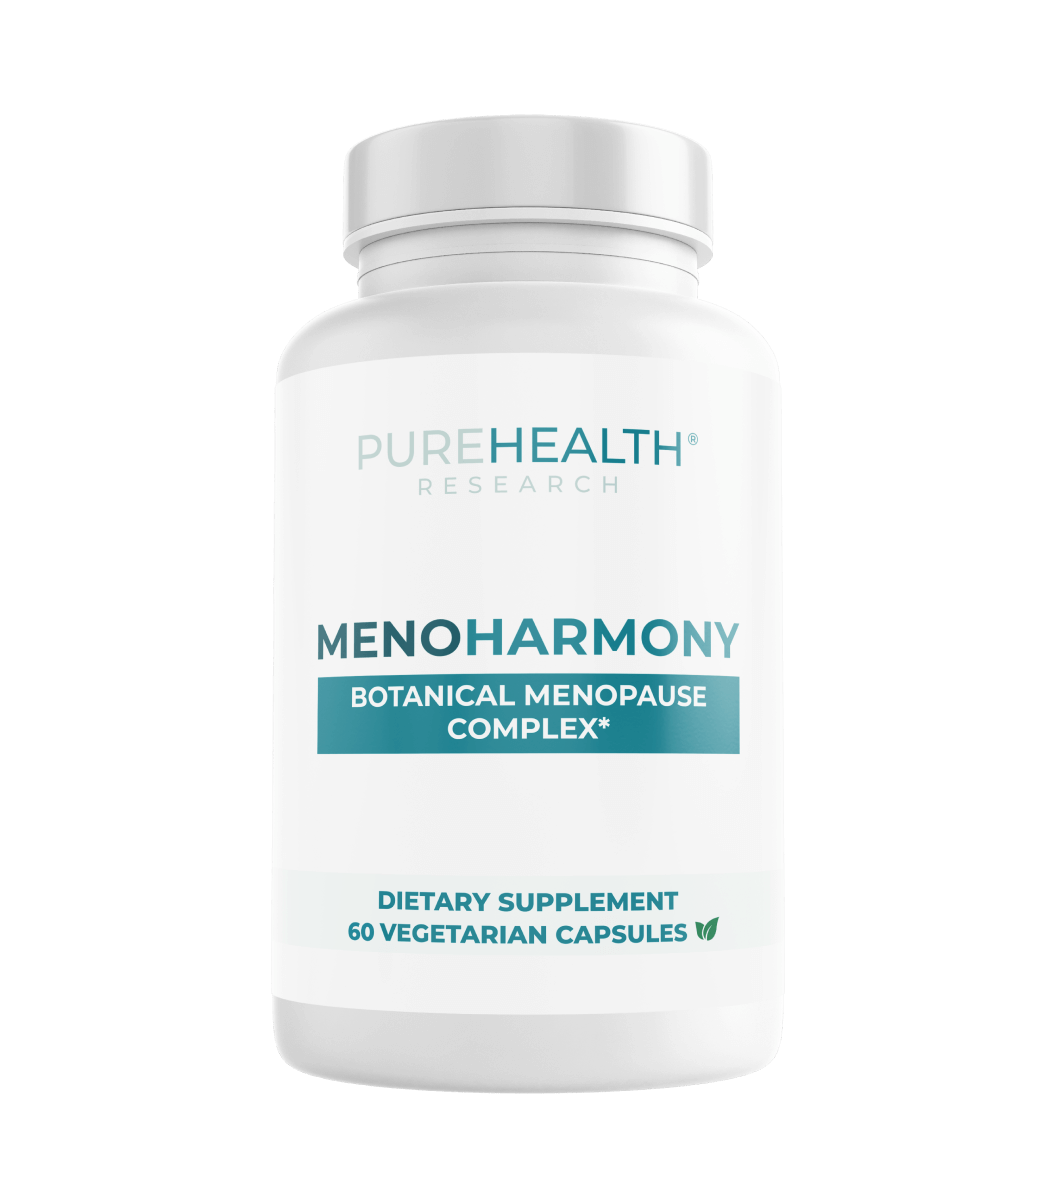 MenoHarmony supplement by PureHealth Research